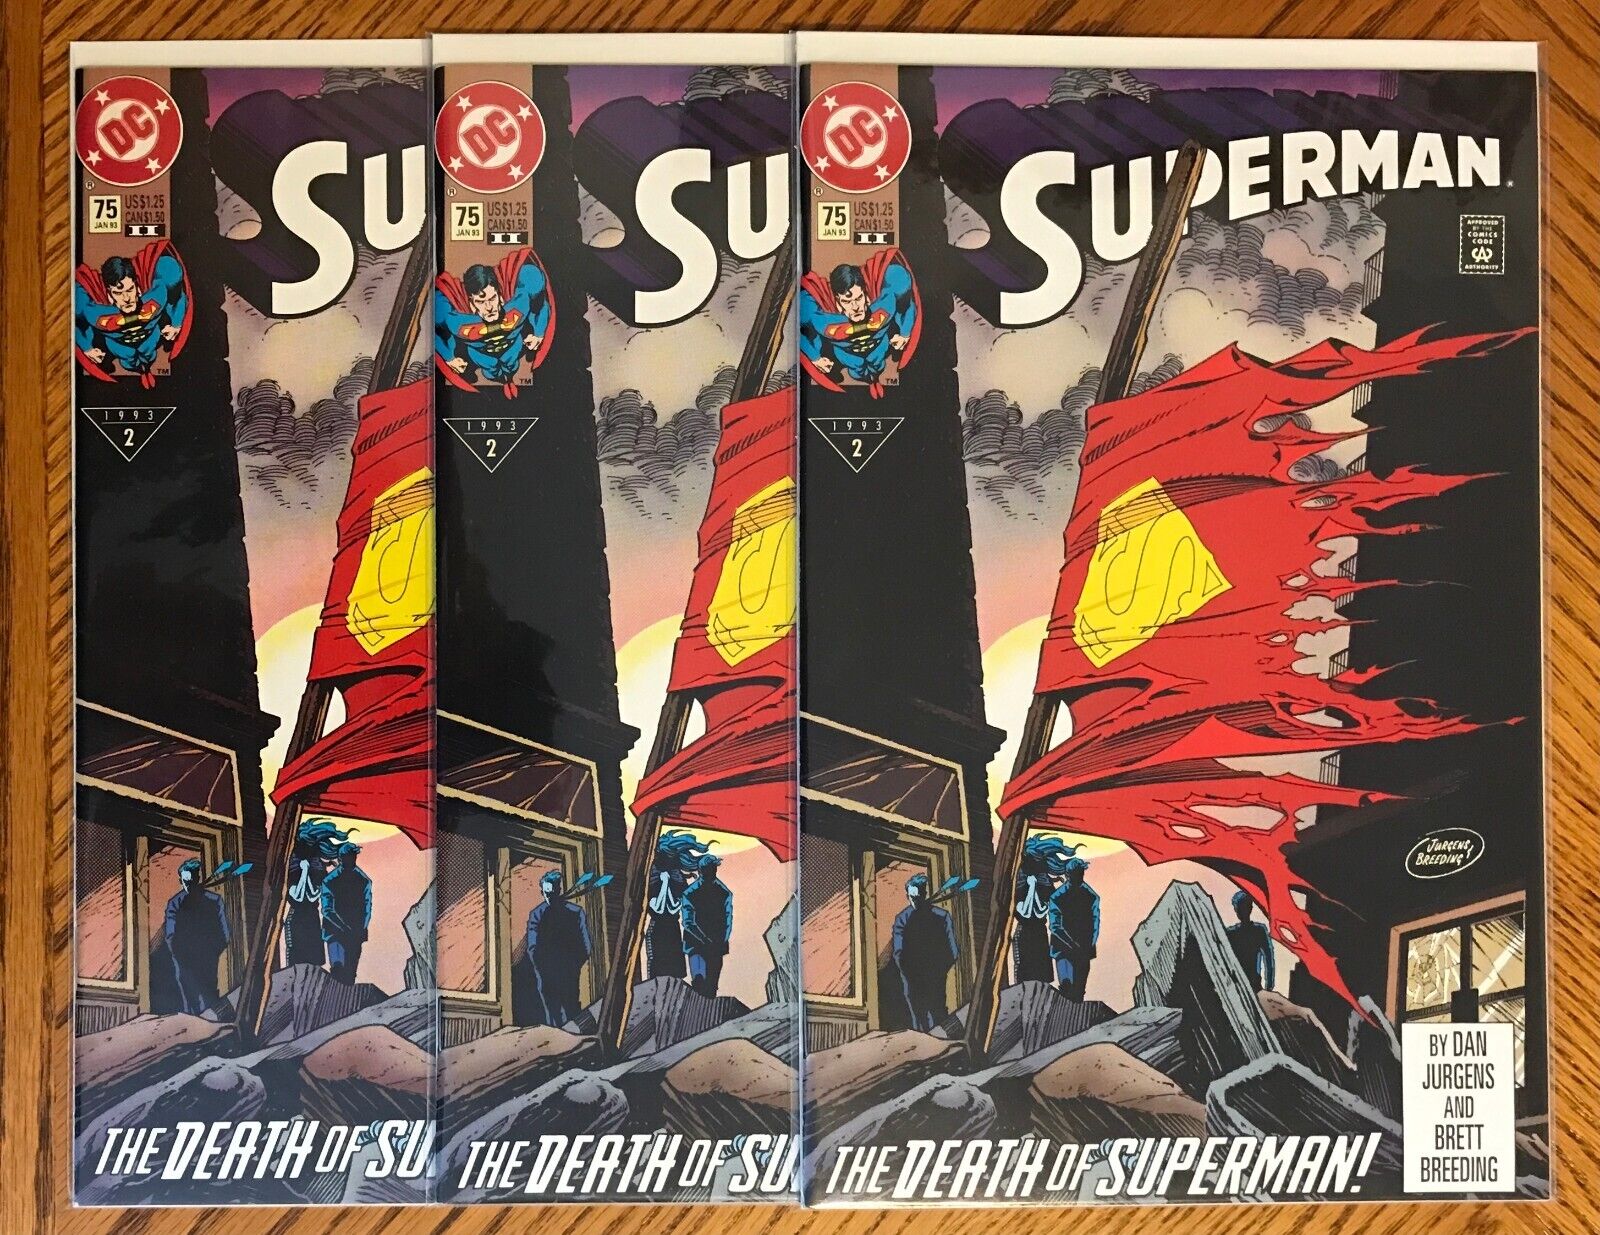 3x SUPERMAN # 75 (2nd Print Reprints Death of Superman) average FN 6.0 condition